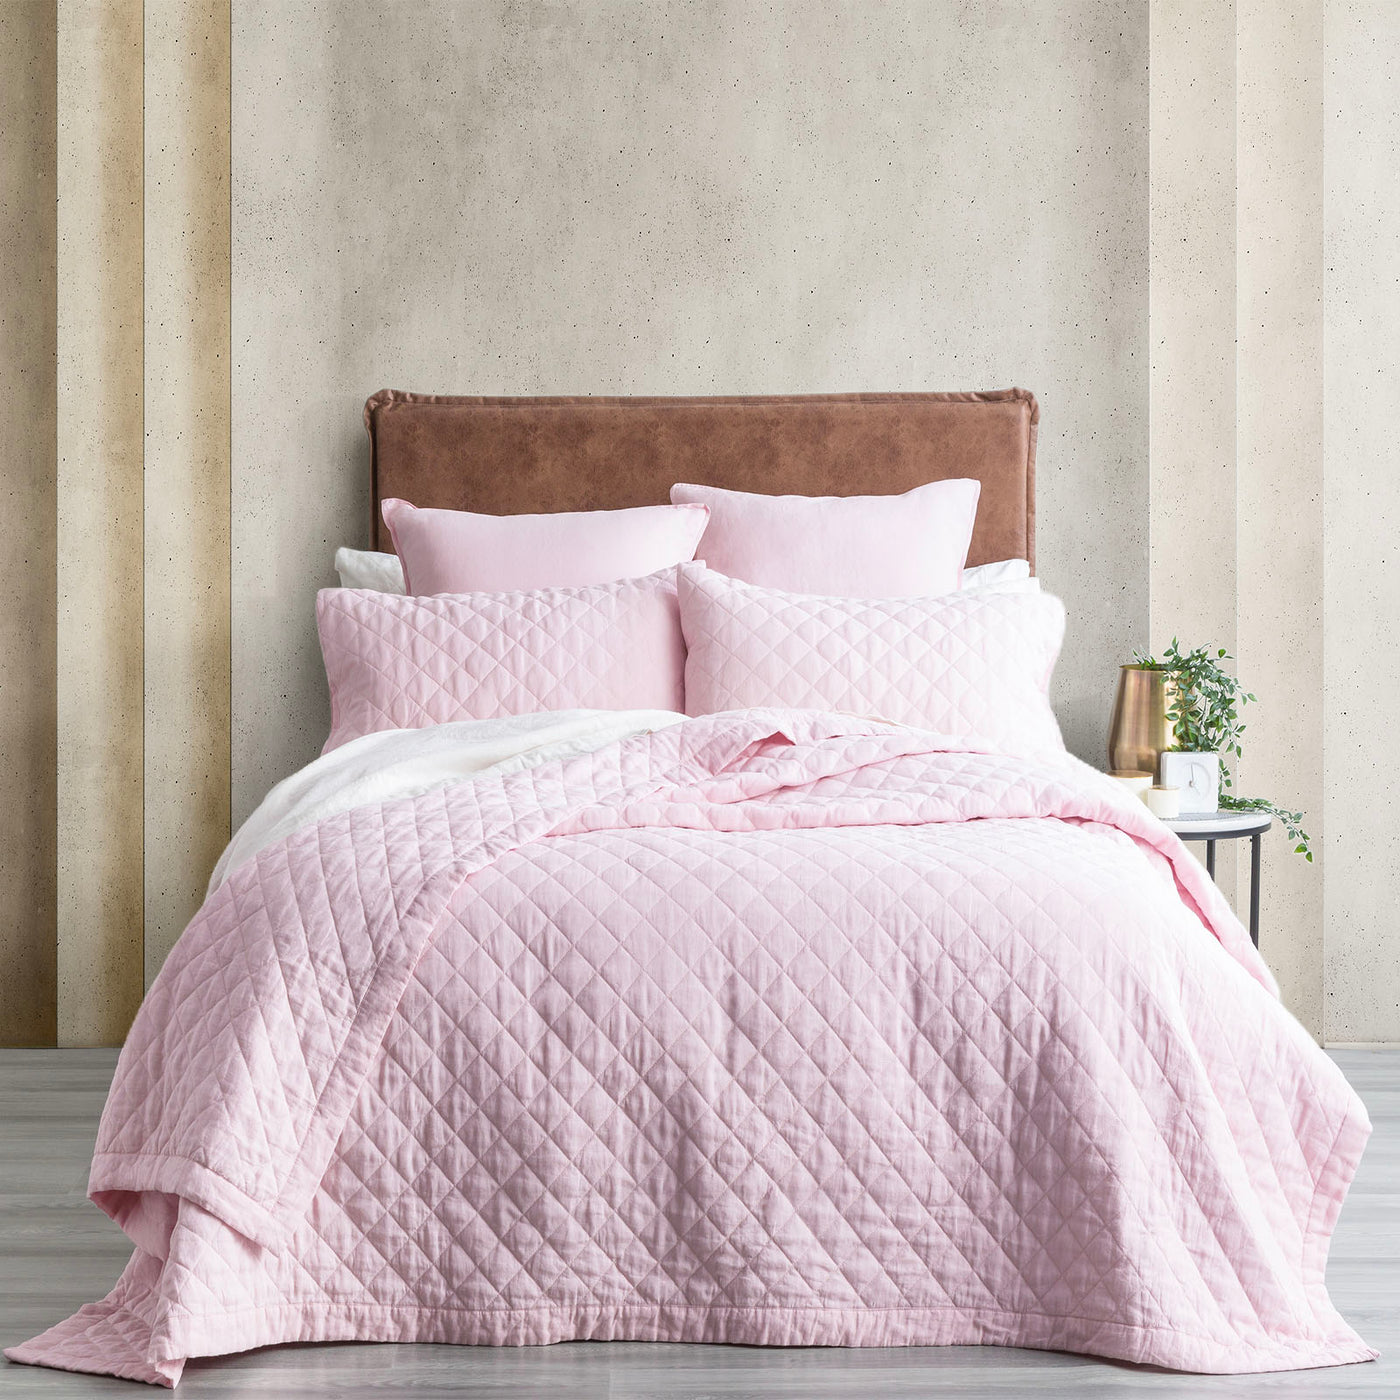 coverlet,coverlets,coverlet set,coverlets australia,kmart coverlet,spotlight coverlets,super king coverlet,adairs coverlet,bedspreads and coverlets,coverlet australia,target coverlet,bed coverlet,pillow talk coverlet,quilted coverlet,what is a coverlet,king coverlet,white coverlet,coverlet sets,coverlets king size,king size coverlets,linen coverlet,pillow talk coverlets,single bed coverlet,adairs coverlets,big w coverlet,cotton coverlet,coverlets and